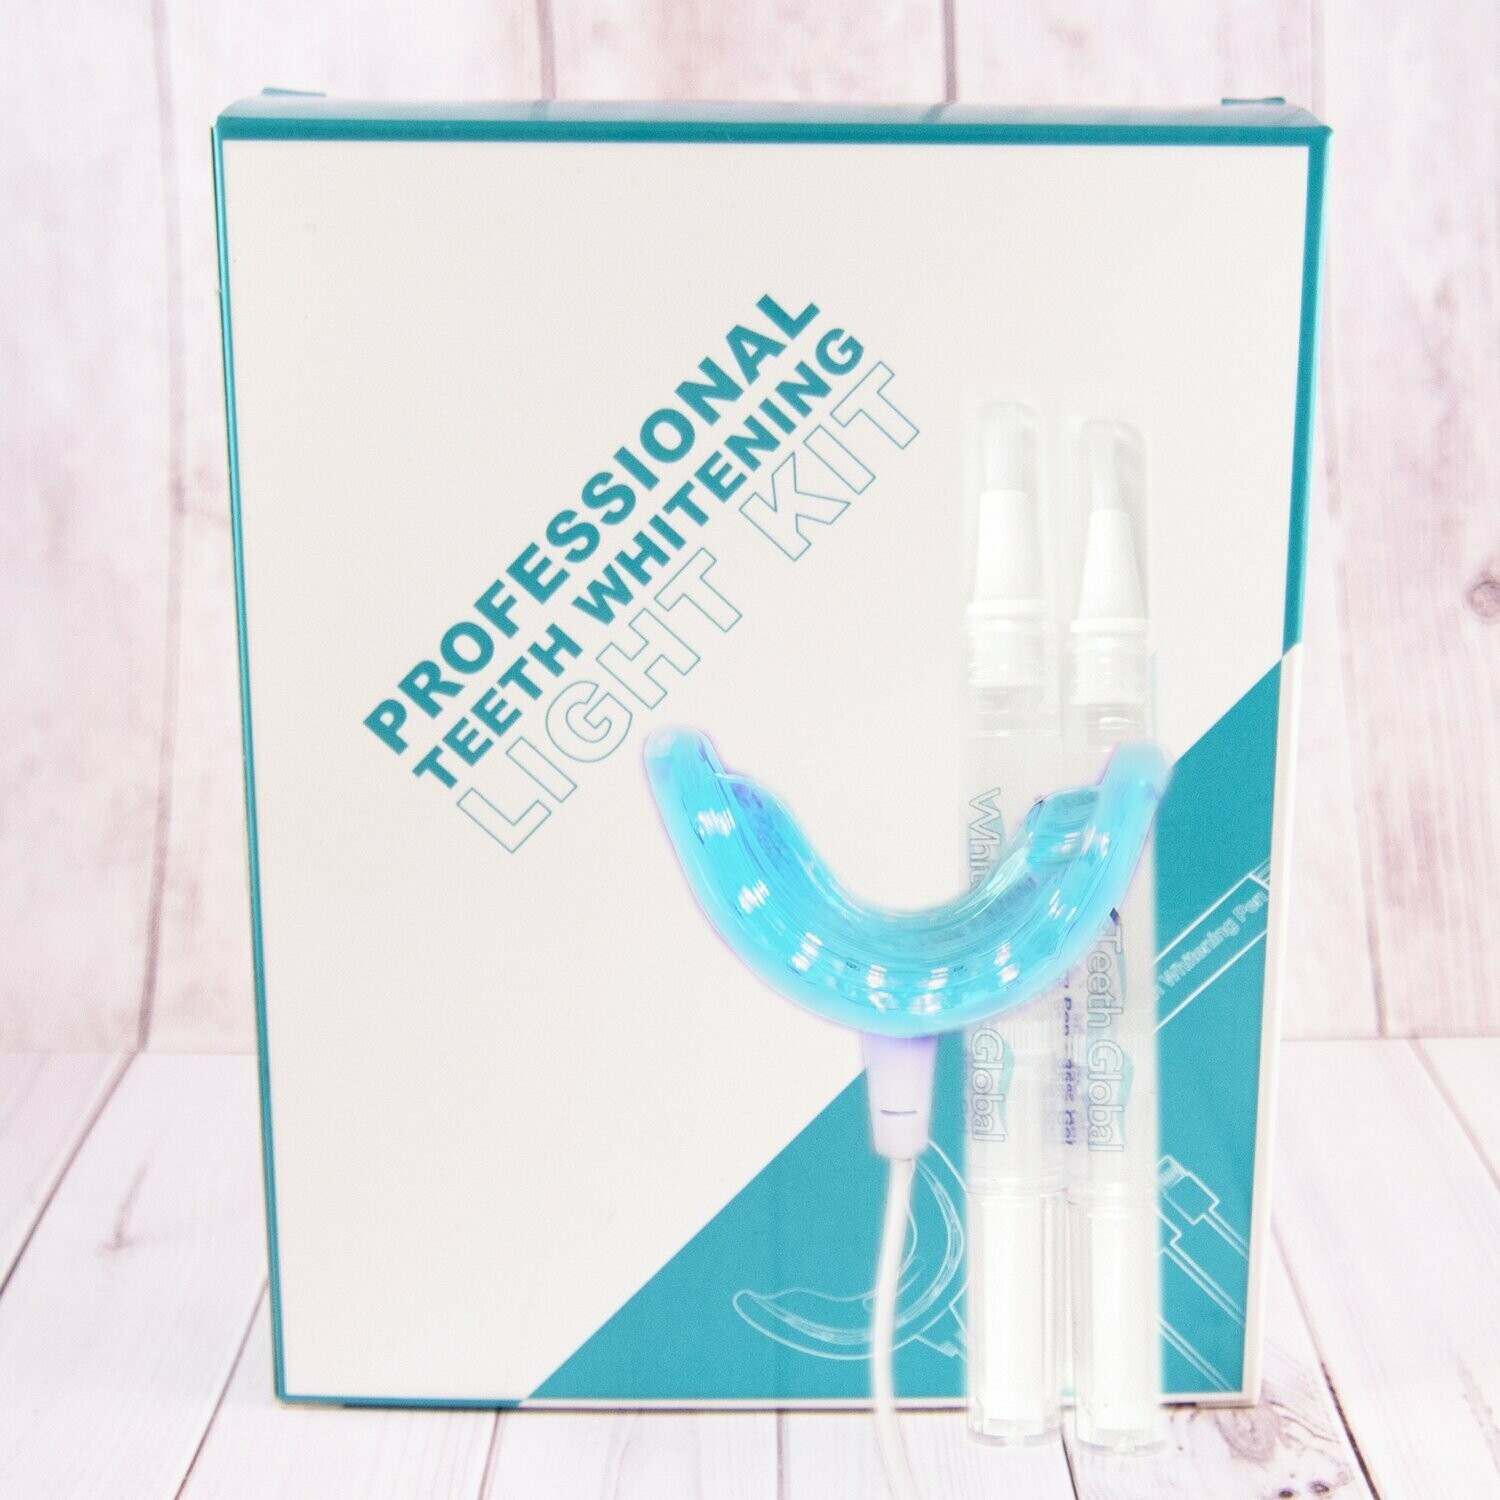 Teeth Whitening 2 Pen Kit 1 Carbamide Peroxide Tooth whitening Gel and 1 Remineralization Gel with iLED light Made in USA